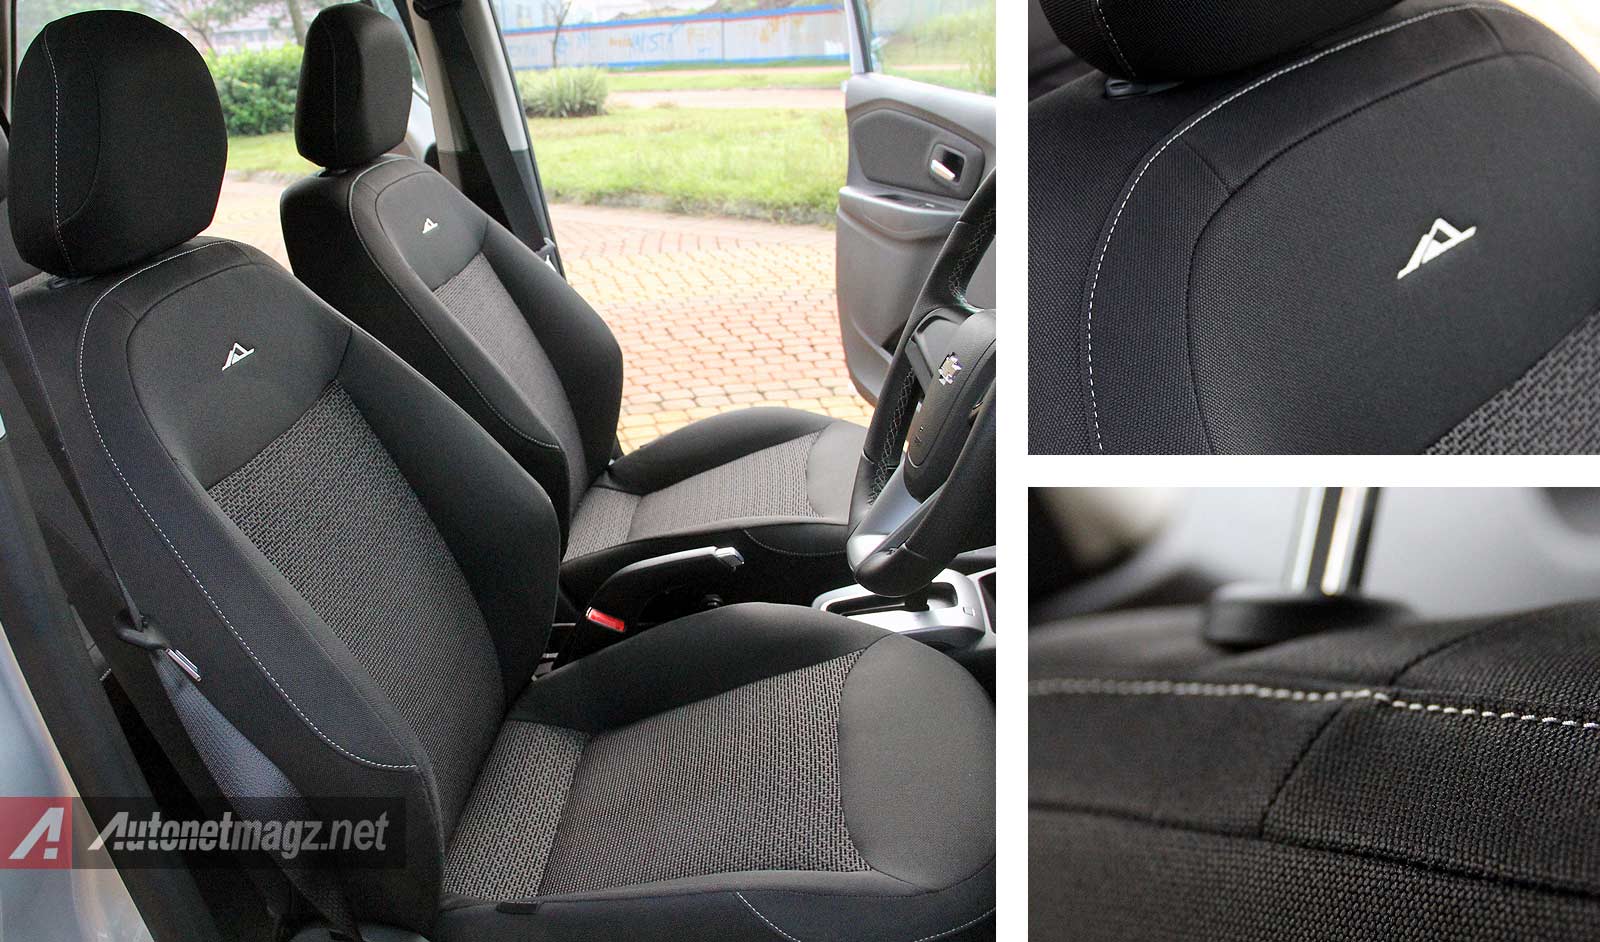 Chevrolet, Detail material bahan kursi jok Chevrolet Spin Activ: Test Drive Review Chevrolet Spin Activ 1.5 AT by AutonetMagz [with Video]